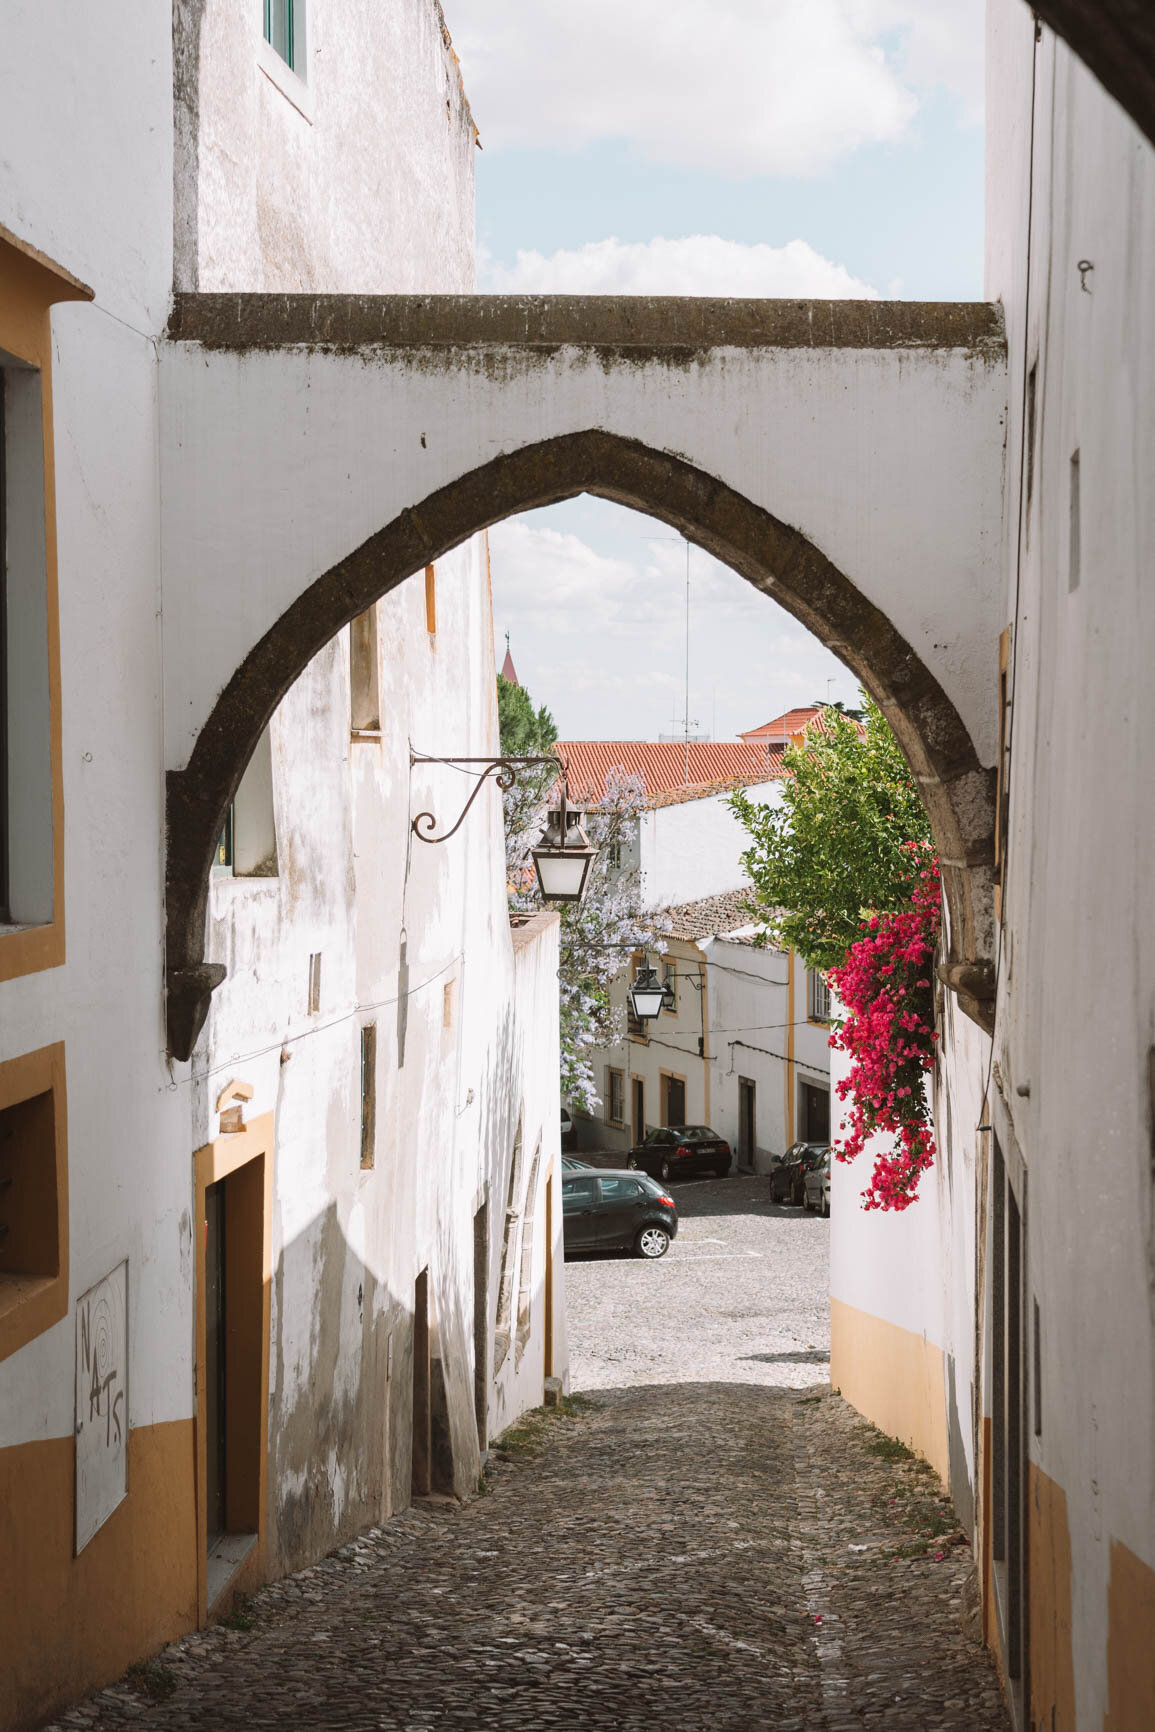 Things to do in Evora - Travel guide to Alentejo Portugal. #Europe #Portgual #TravelGuide